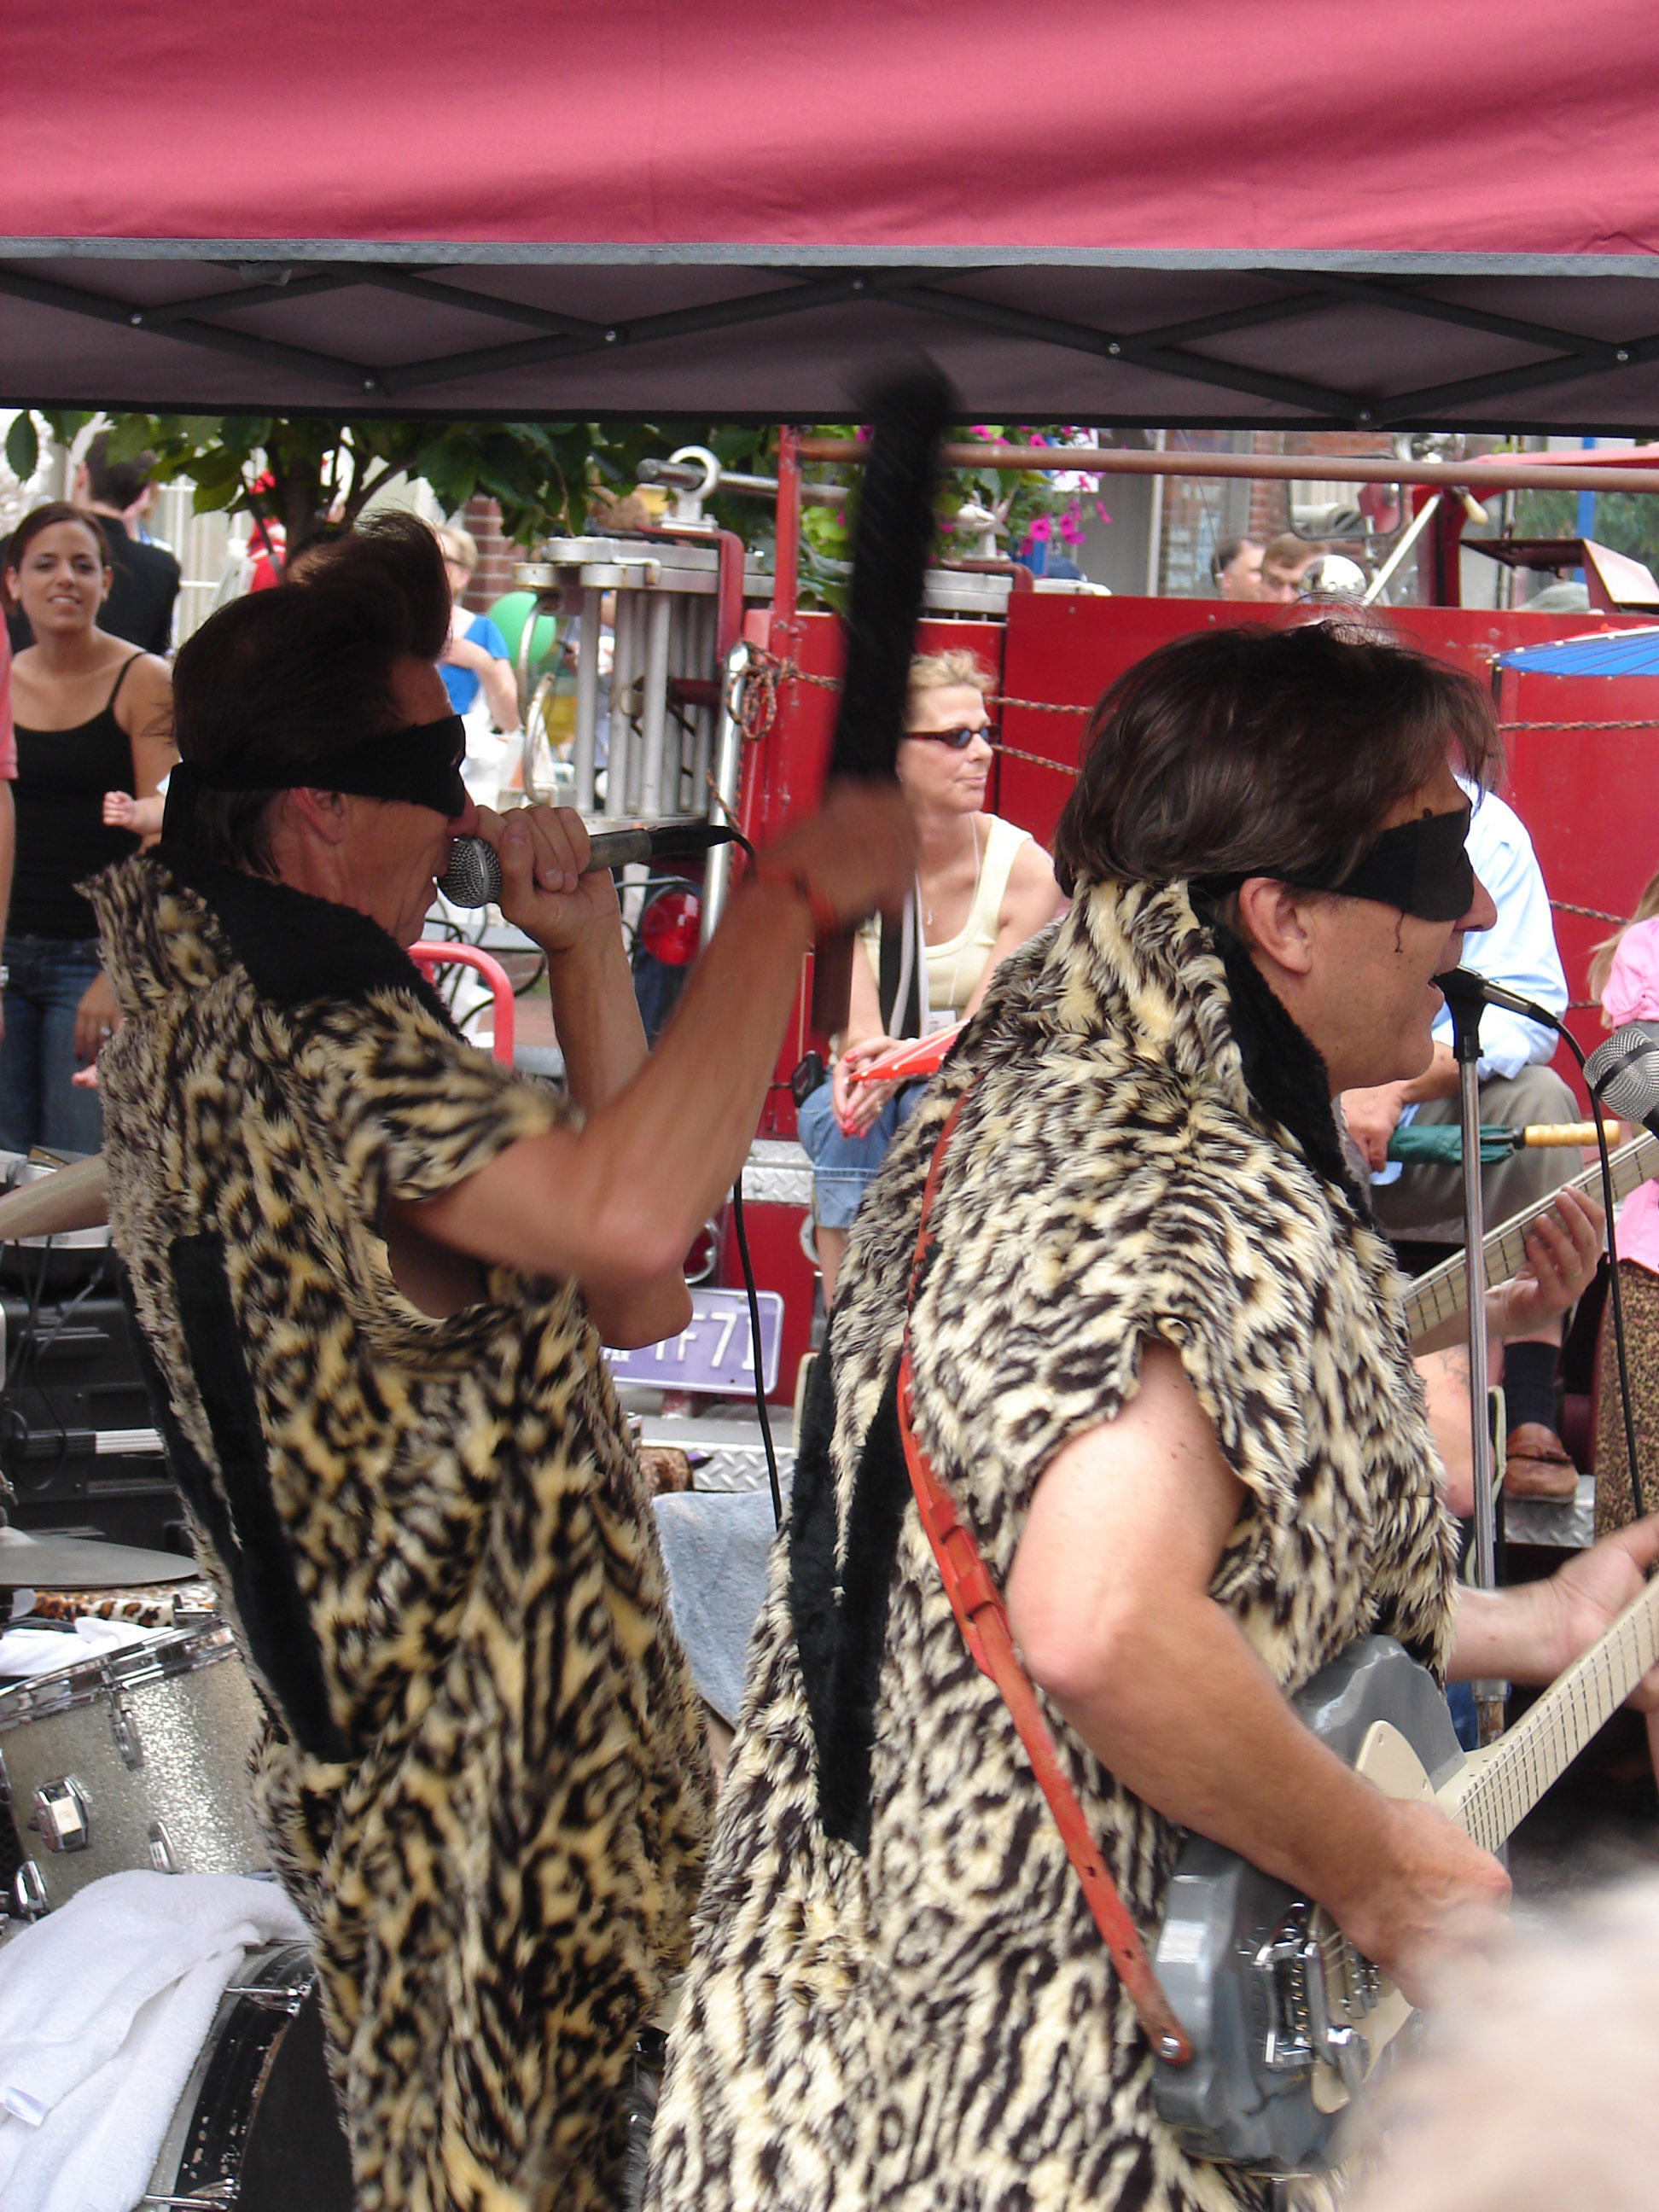 A Band of Neanderthals plays a gig at the Blobfest